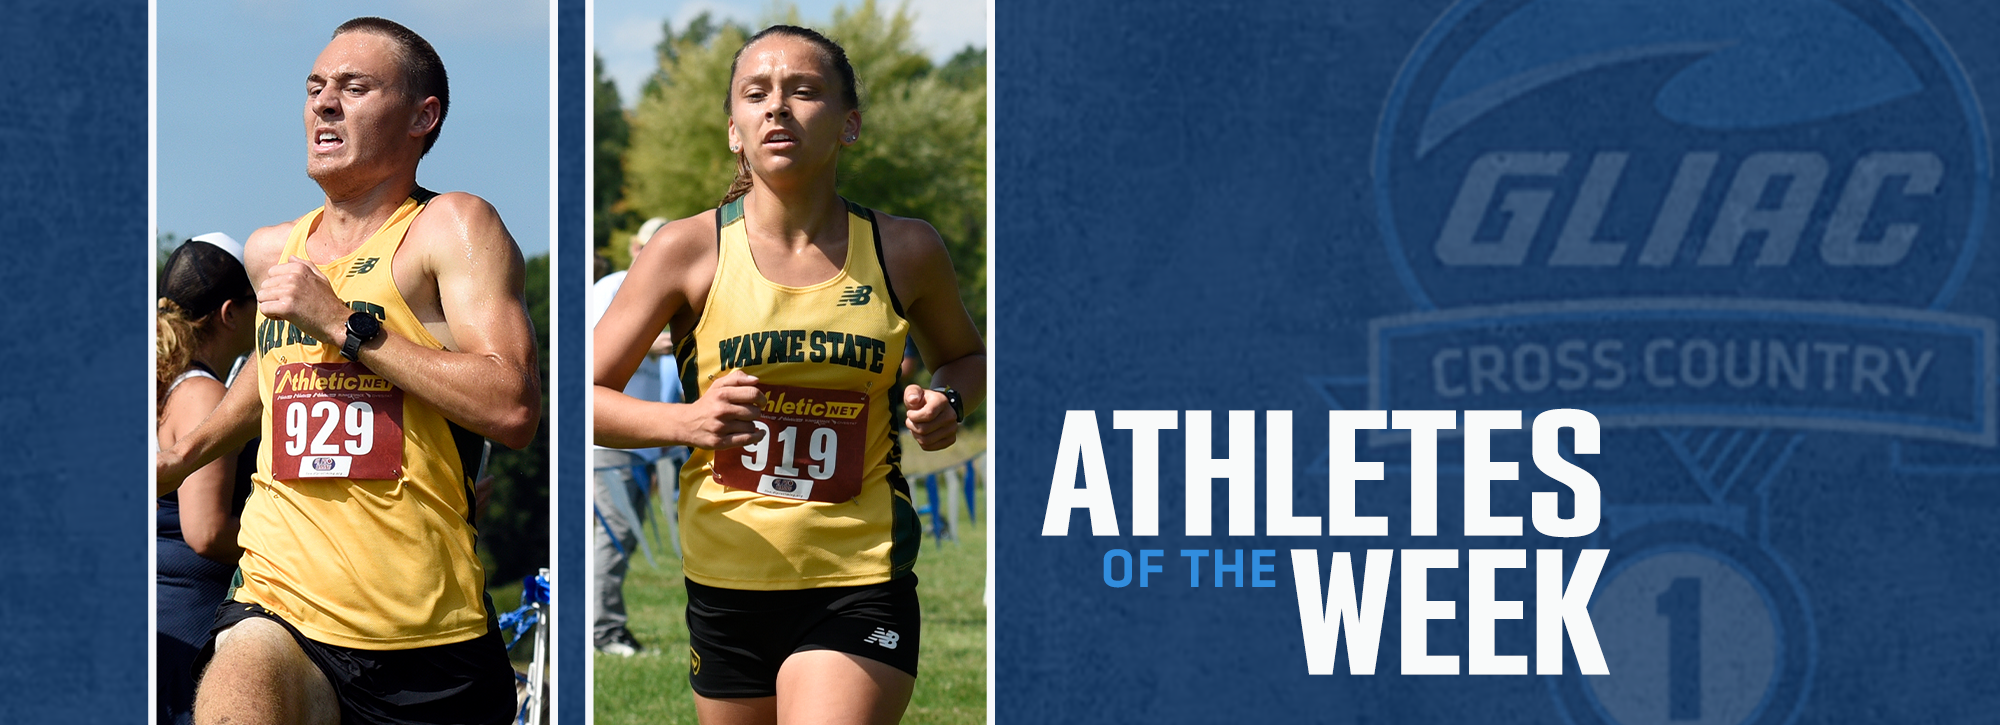 WSU's Buchanan and Justice recognized with athlete of the week honors in cross country